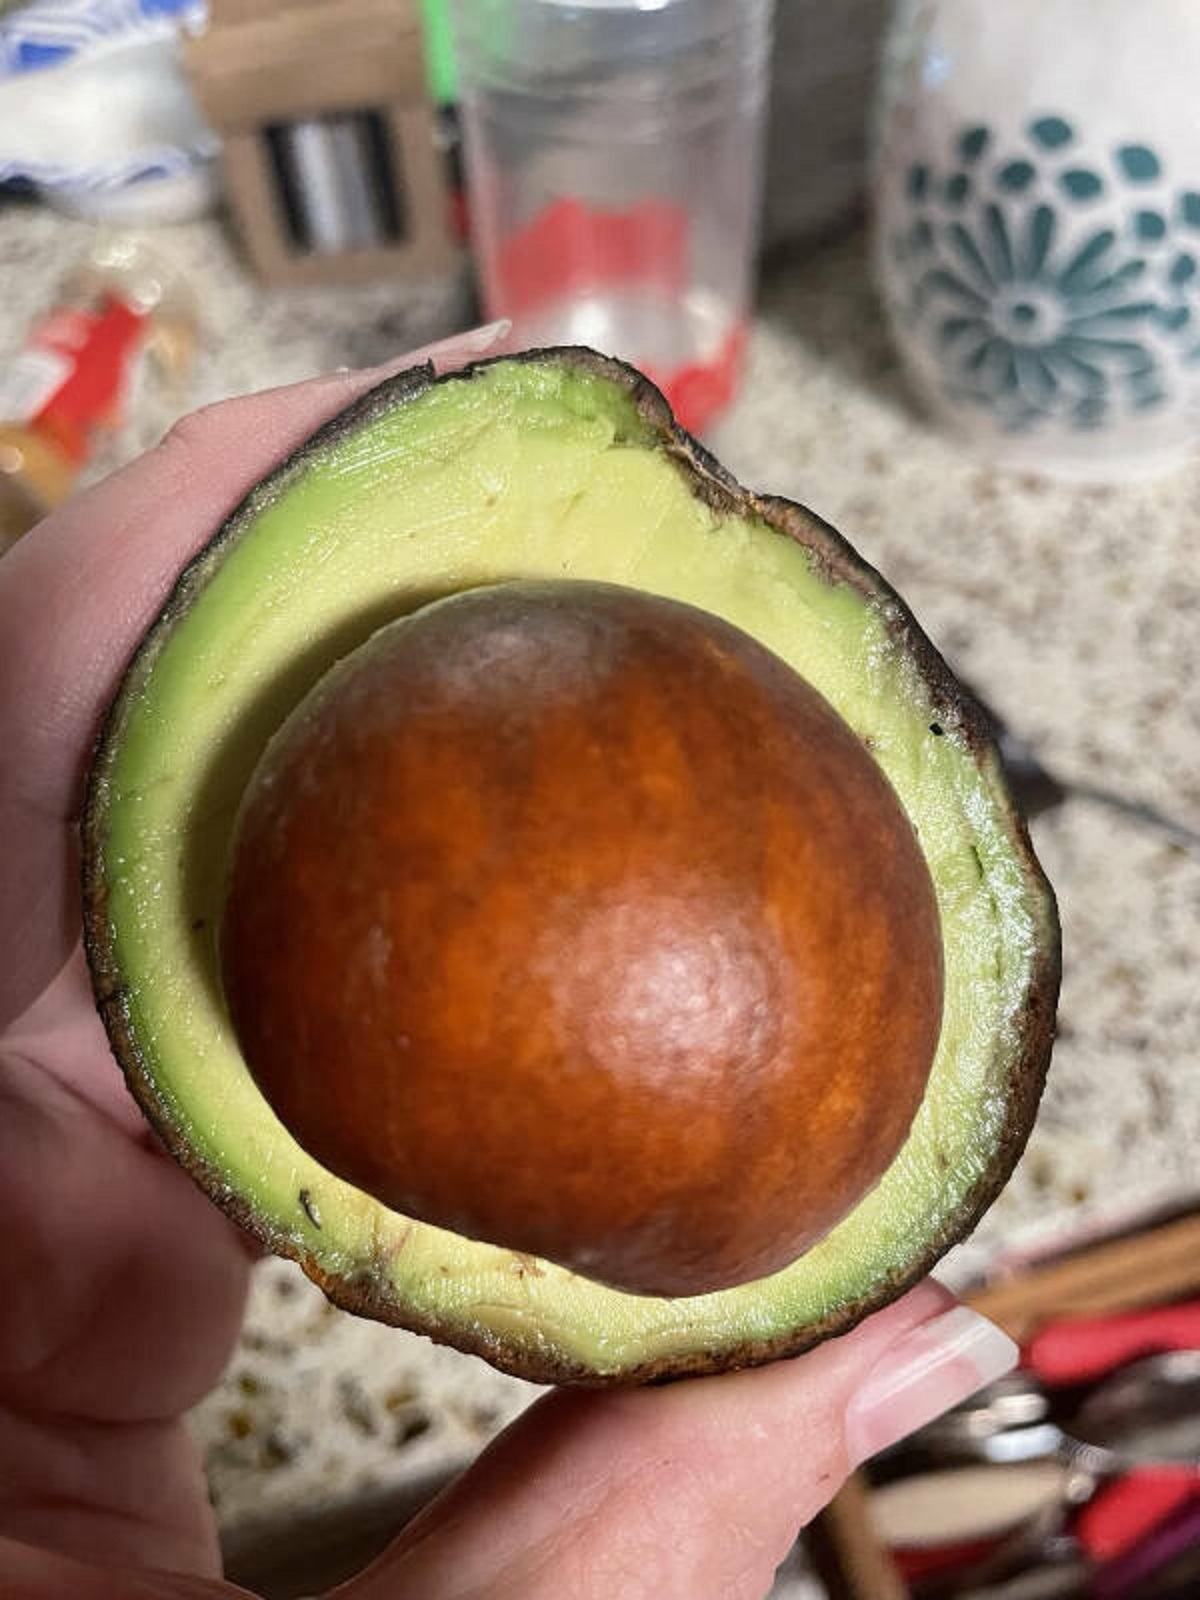 “My mom just opened her newly ripened avocado ..seed?”